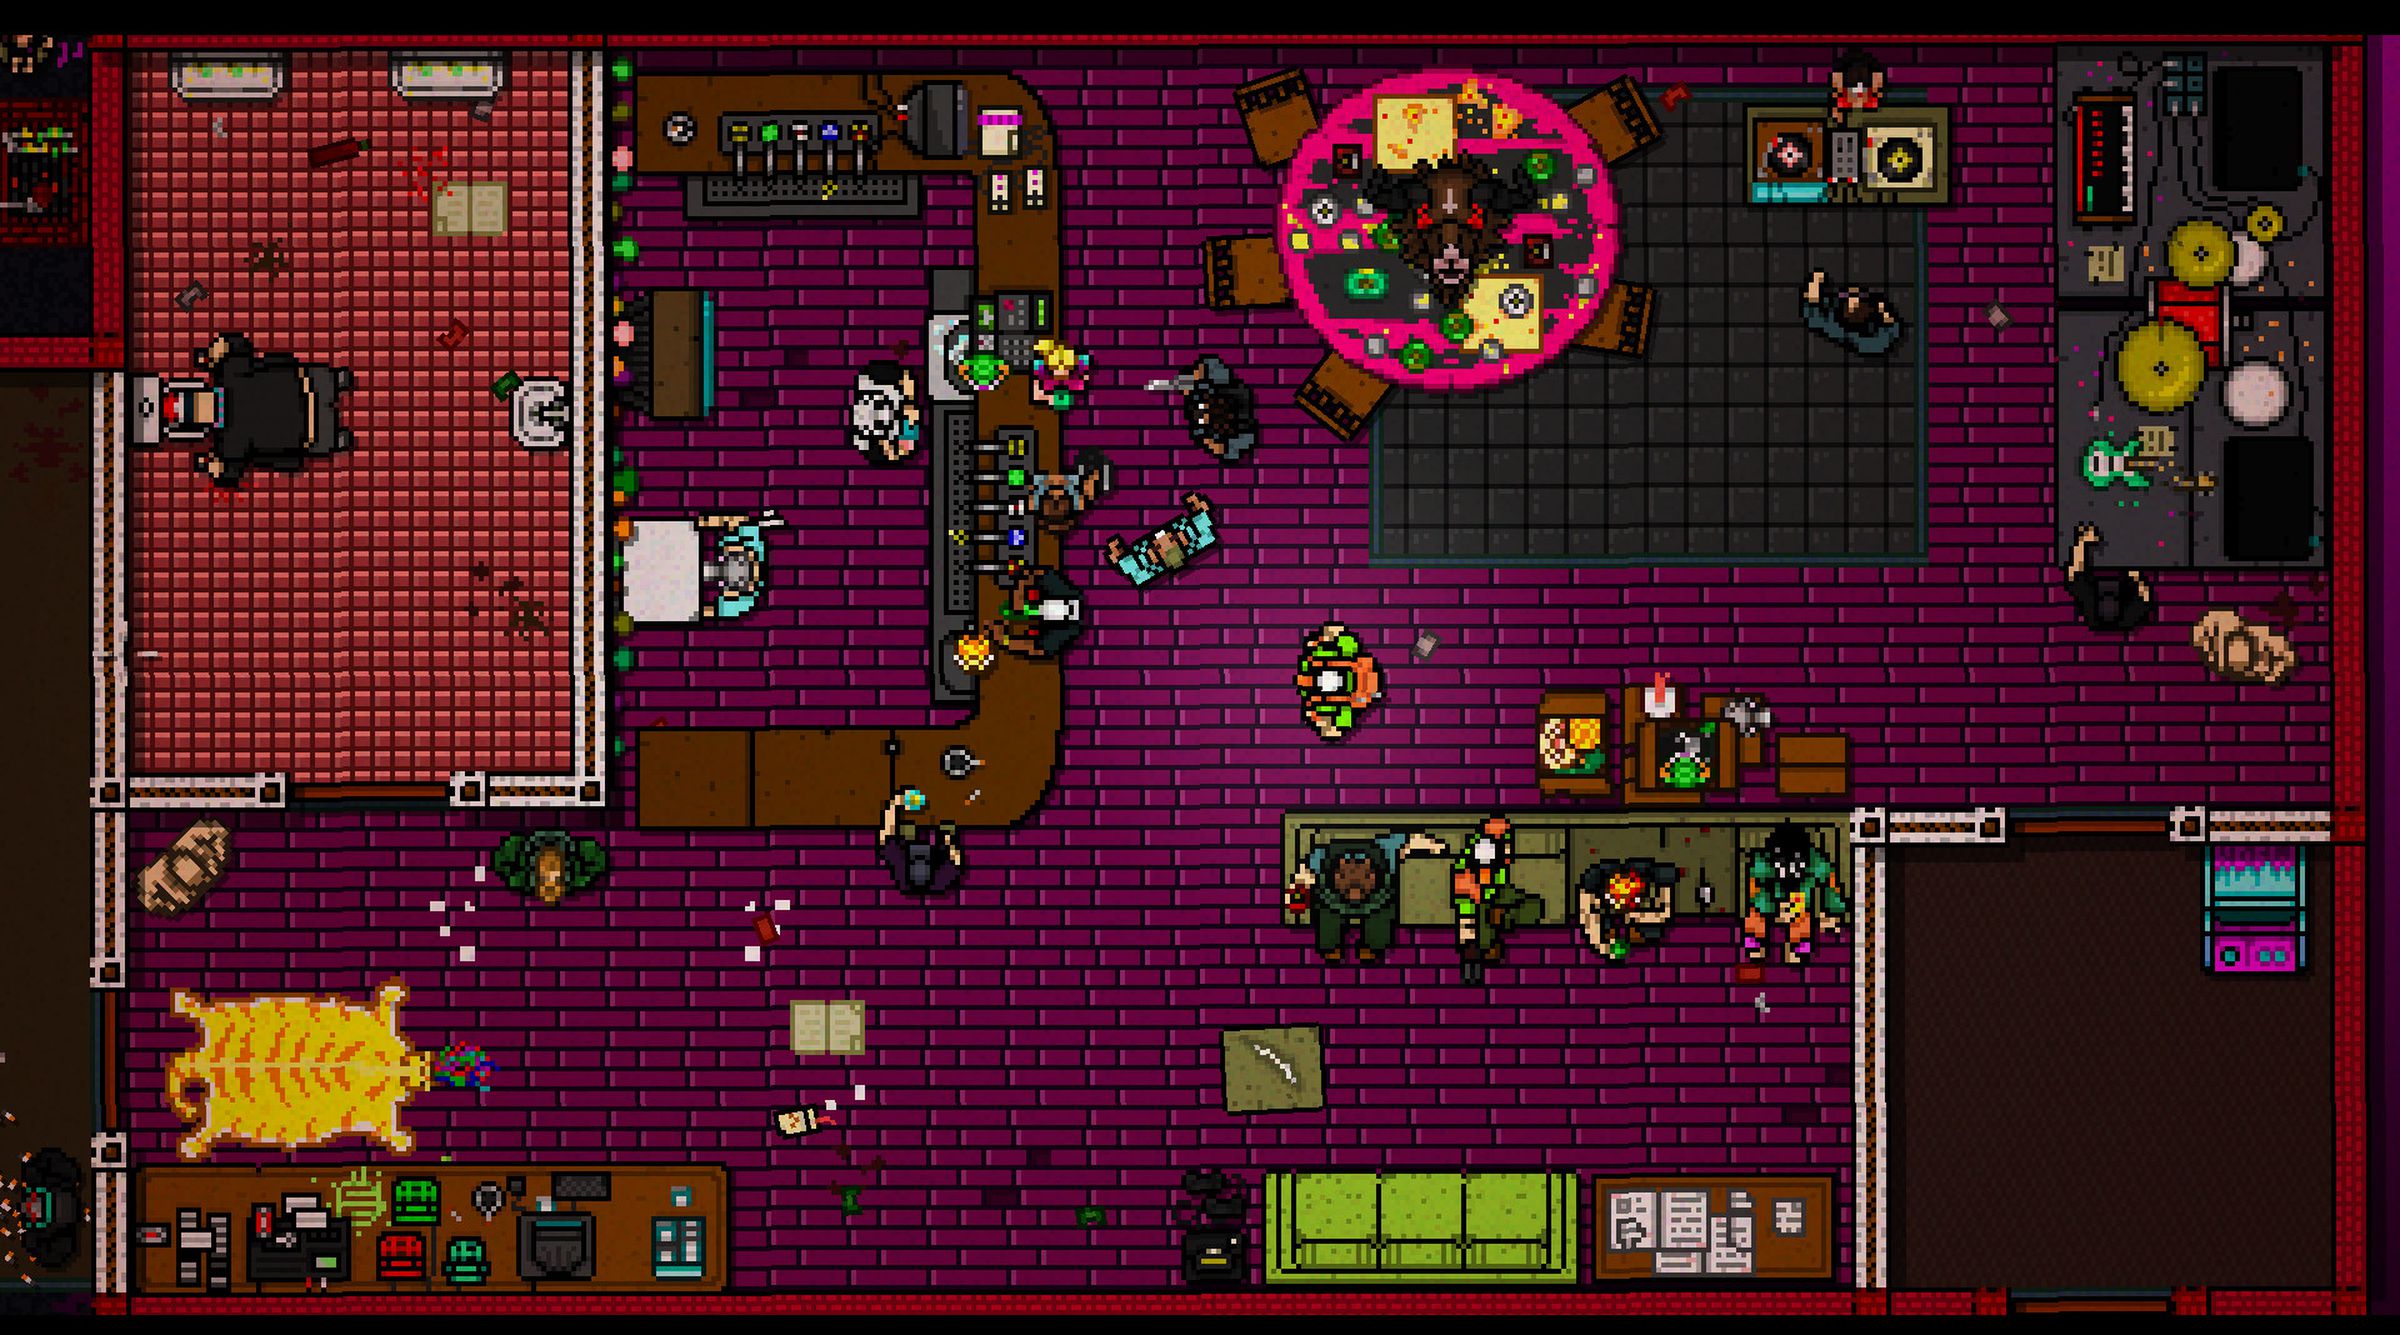 A screenshot from the video game Hotline Miami 2: Wrong Number.